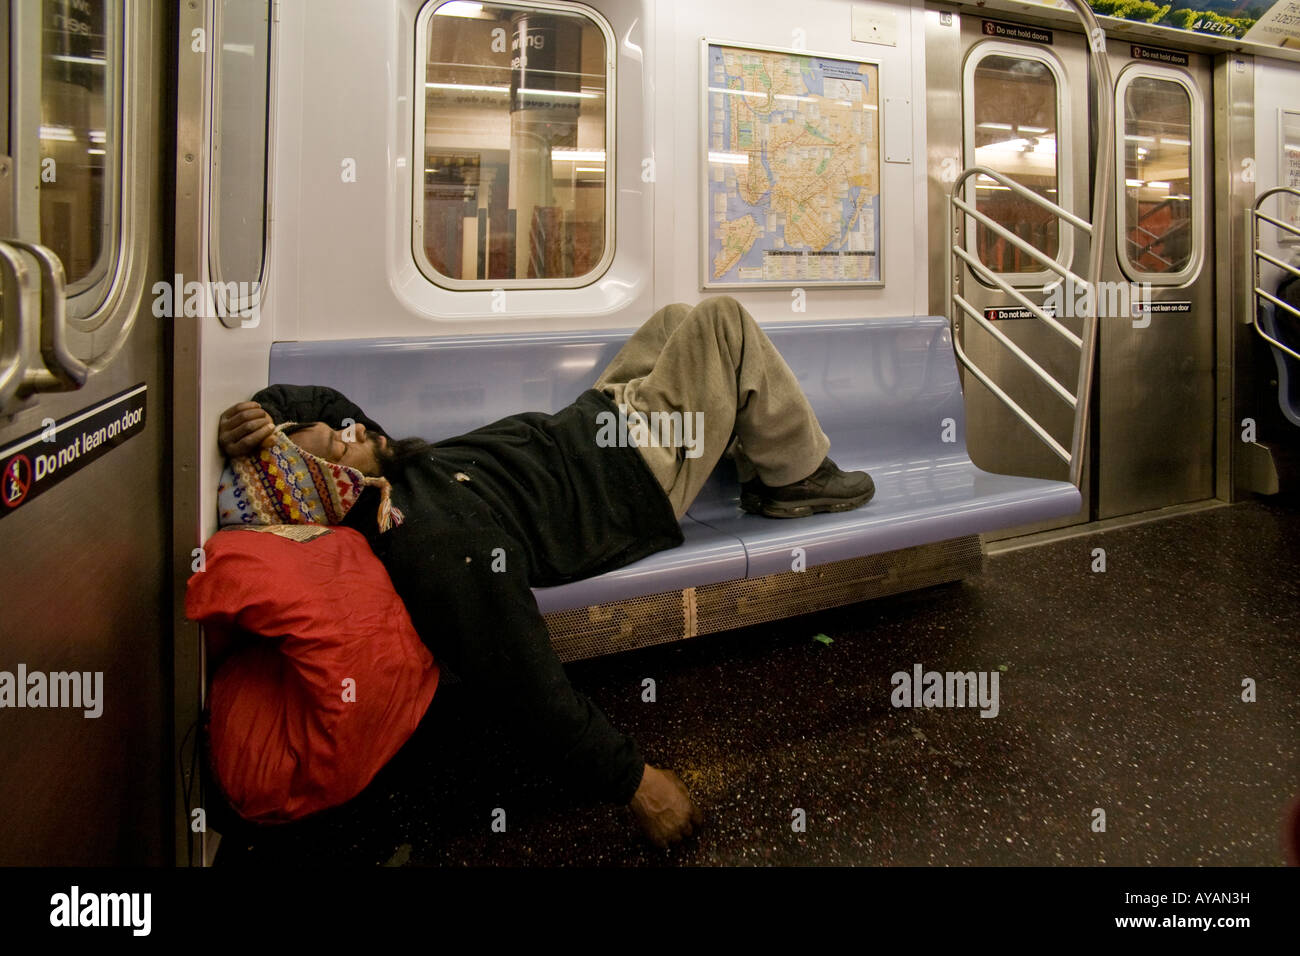 A homeless man sleeps on a subway seat in New York City Stock Photo